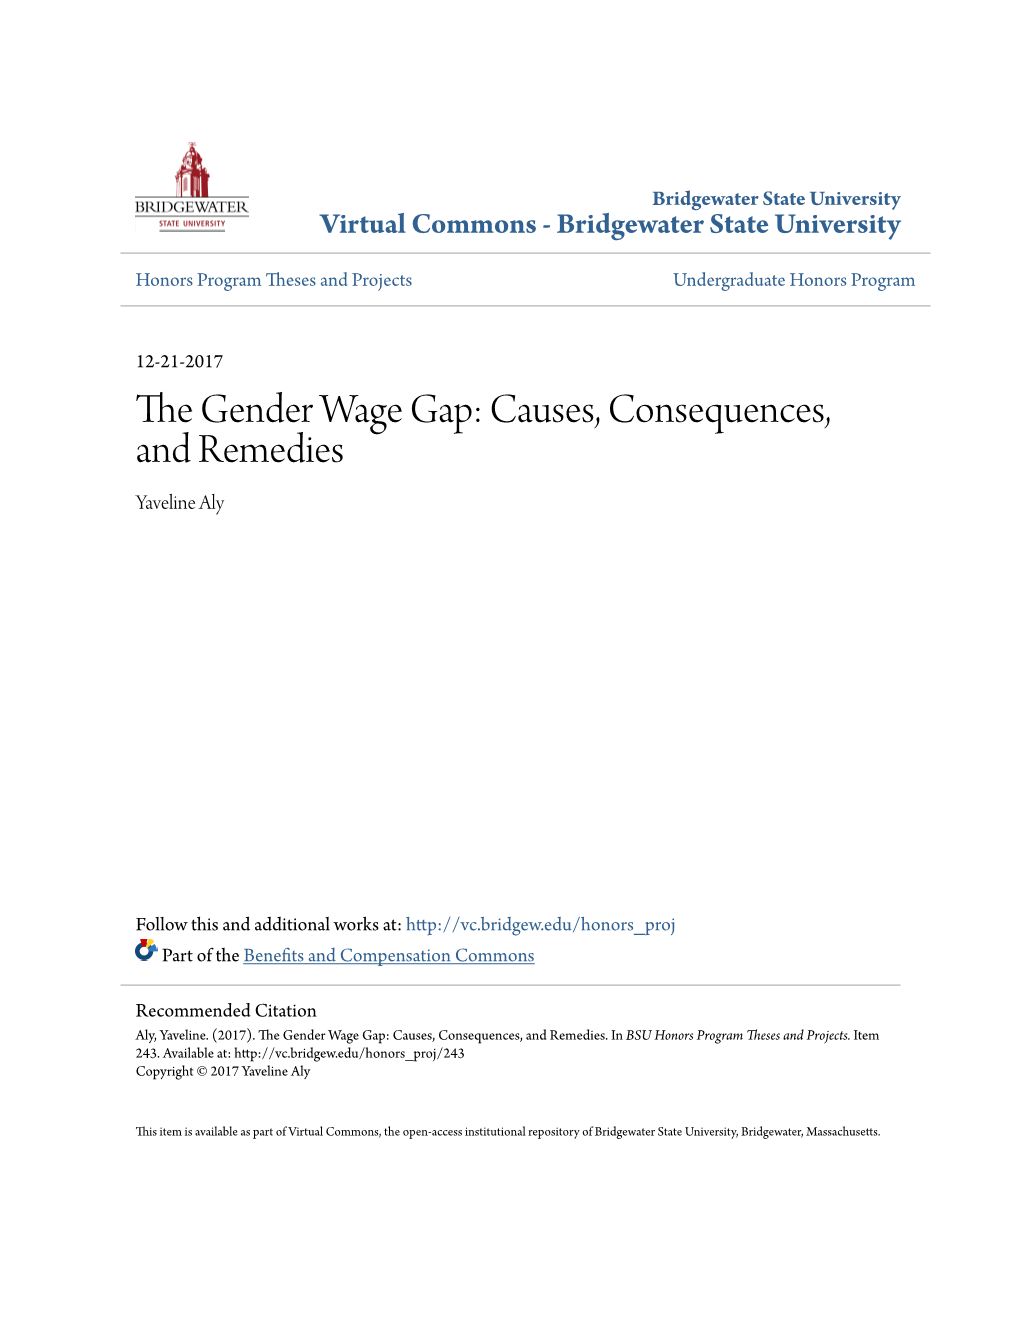 The Gender Wage Gap: Causes, Consequences, and Remedies Yaveline Aly